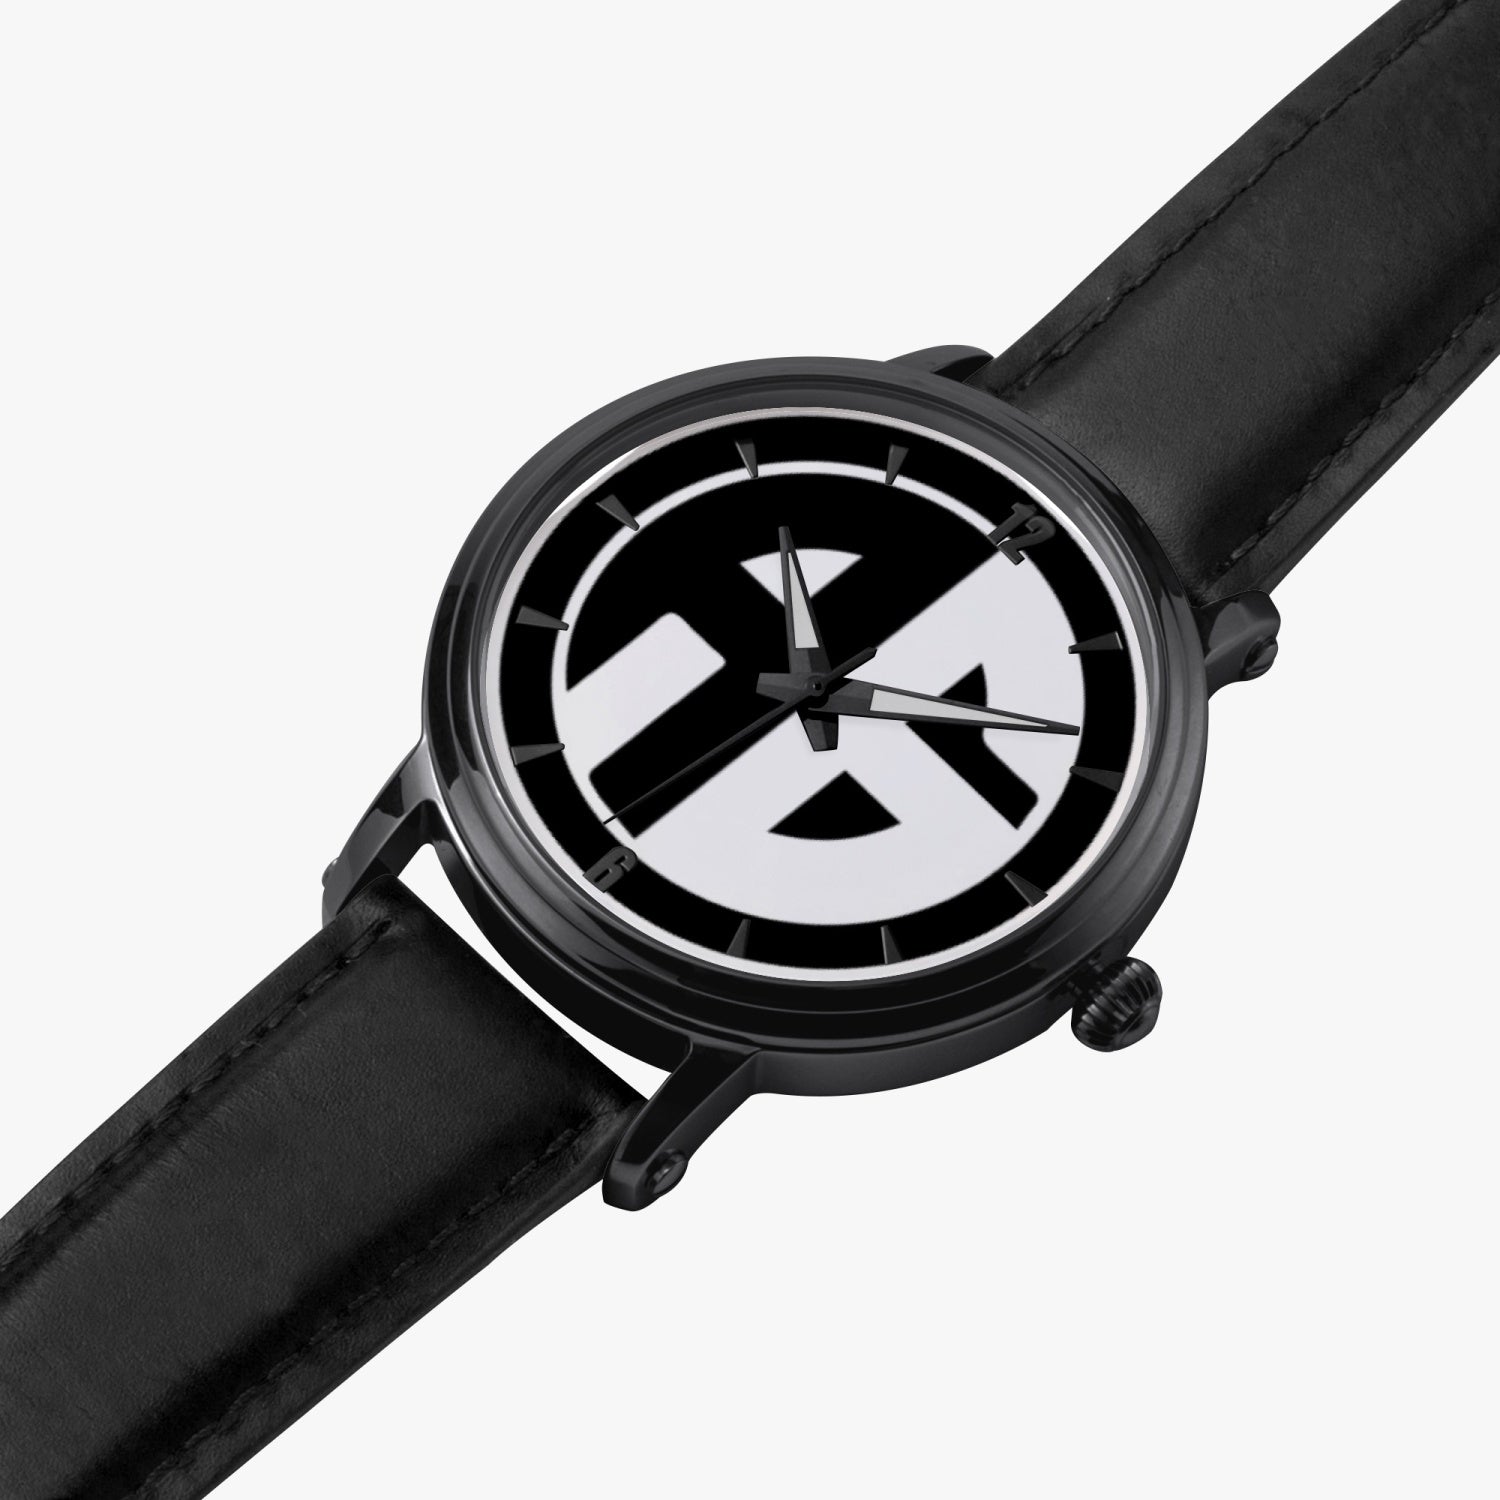 Black case with black band watch lying flat